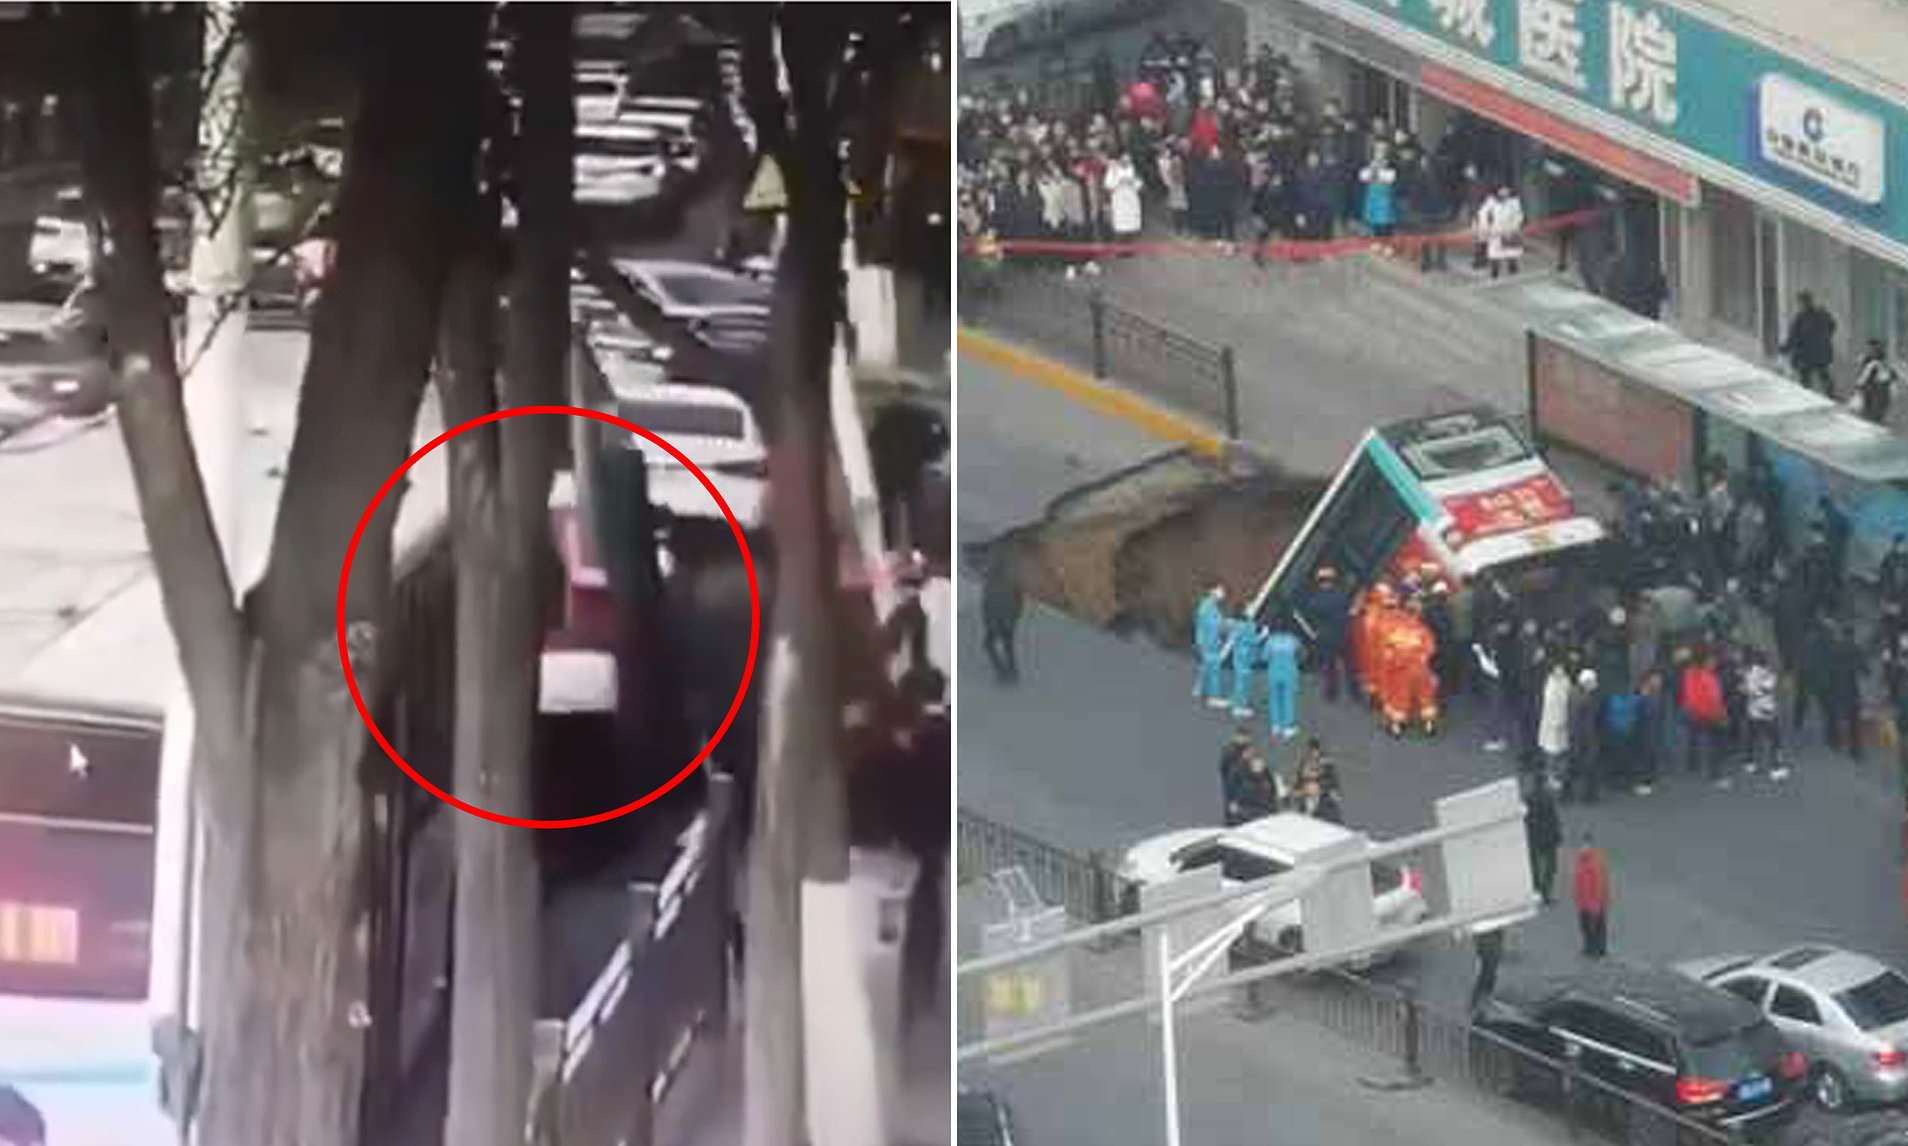 At least nine people are killed after a bus full of passengers was swallowed by a huge sinkhole in the rush hour in China